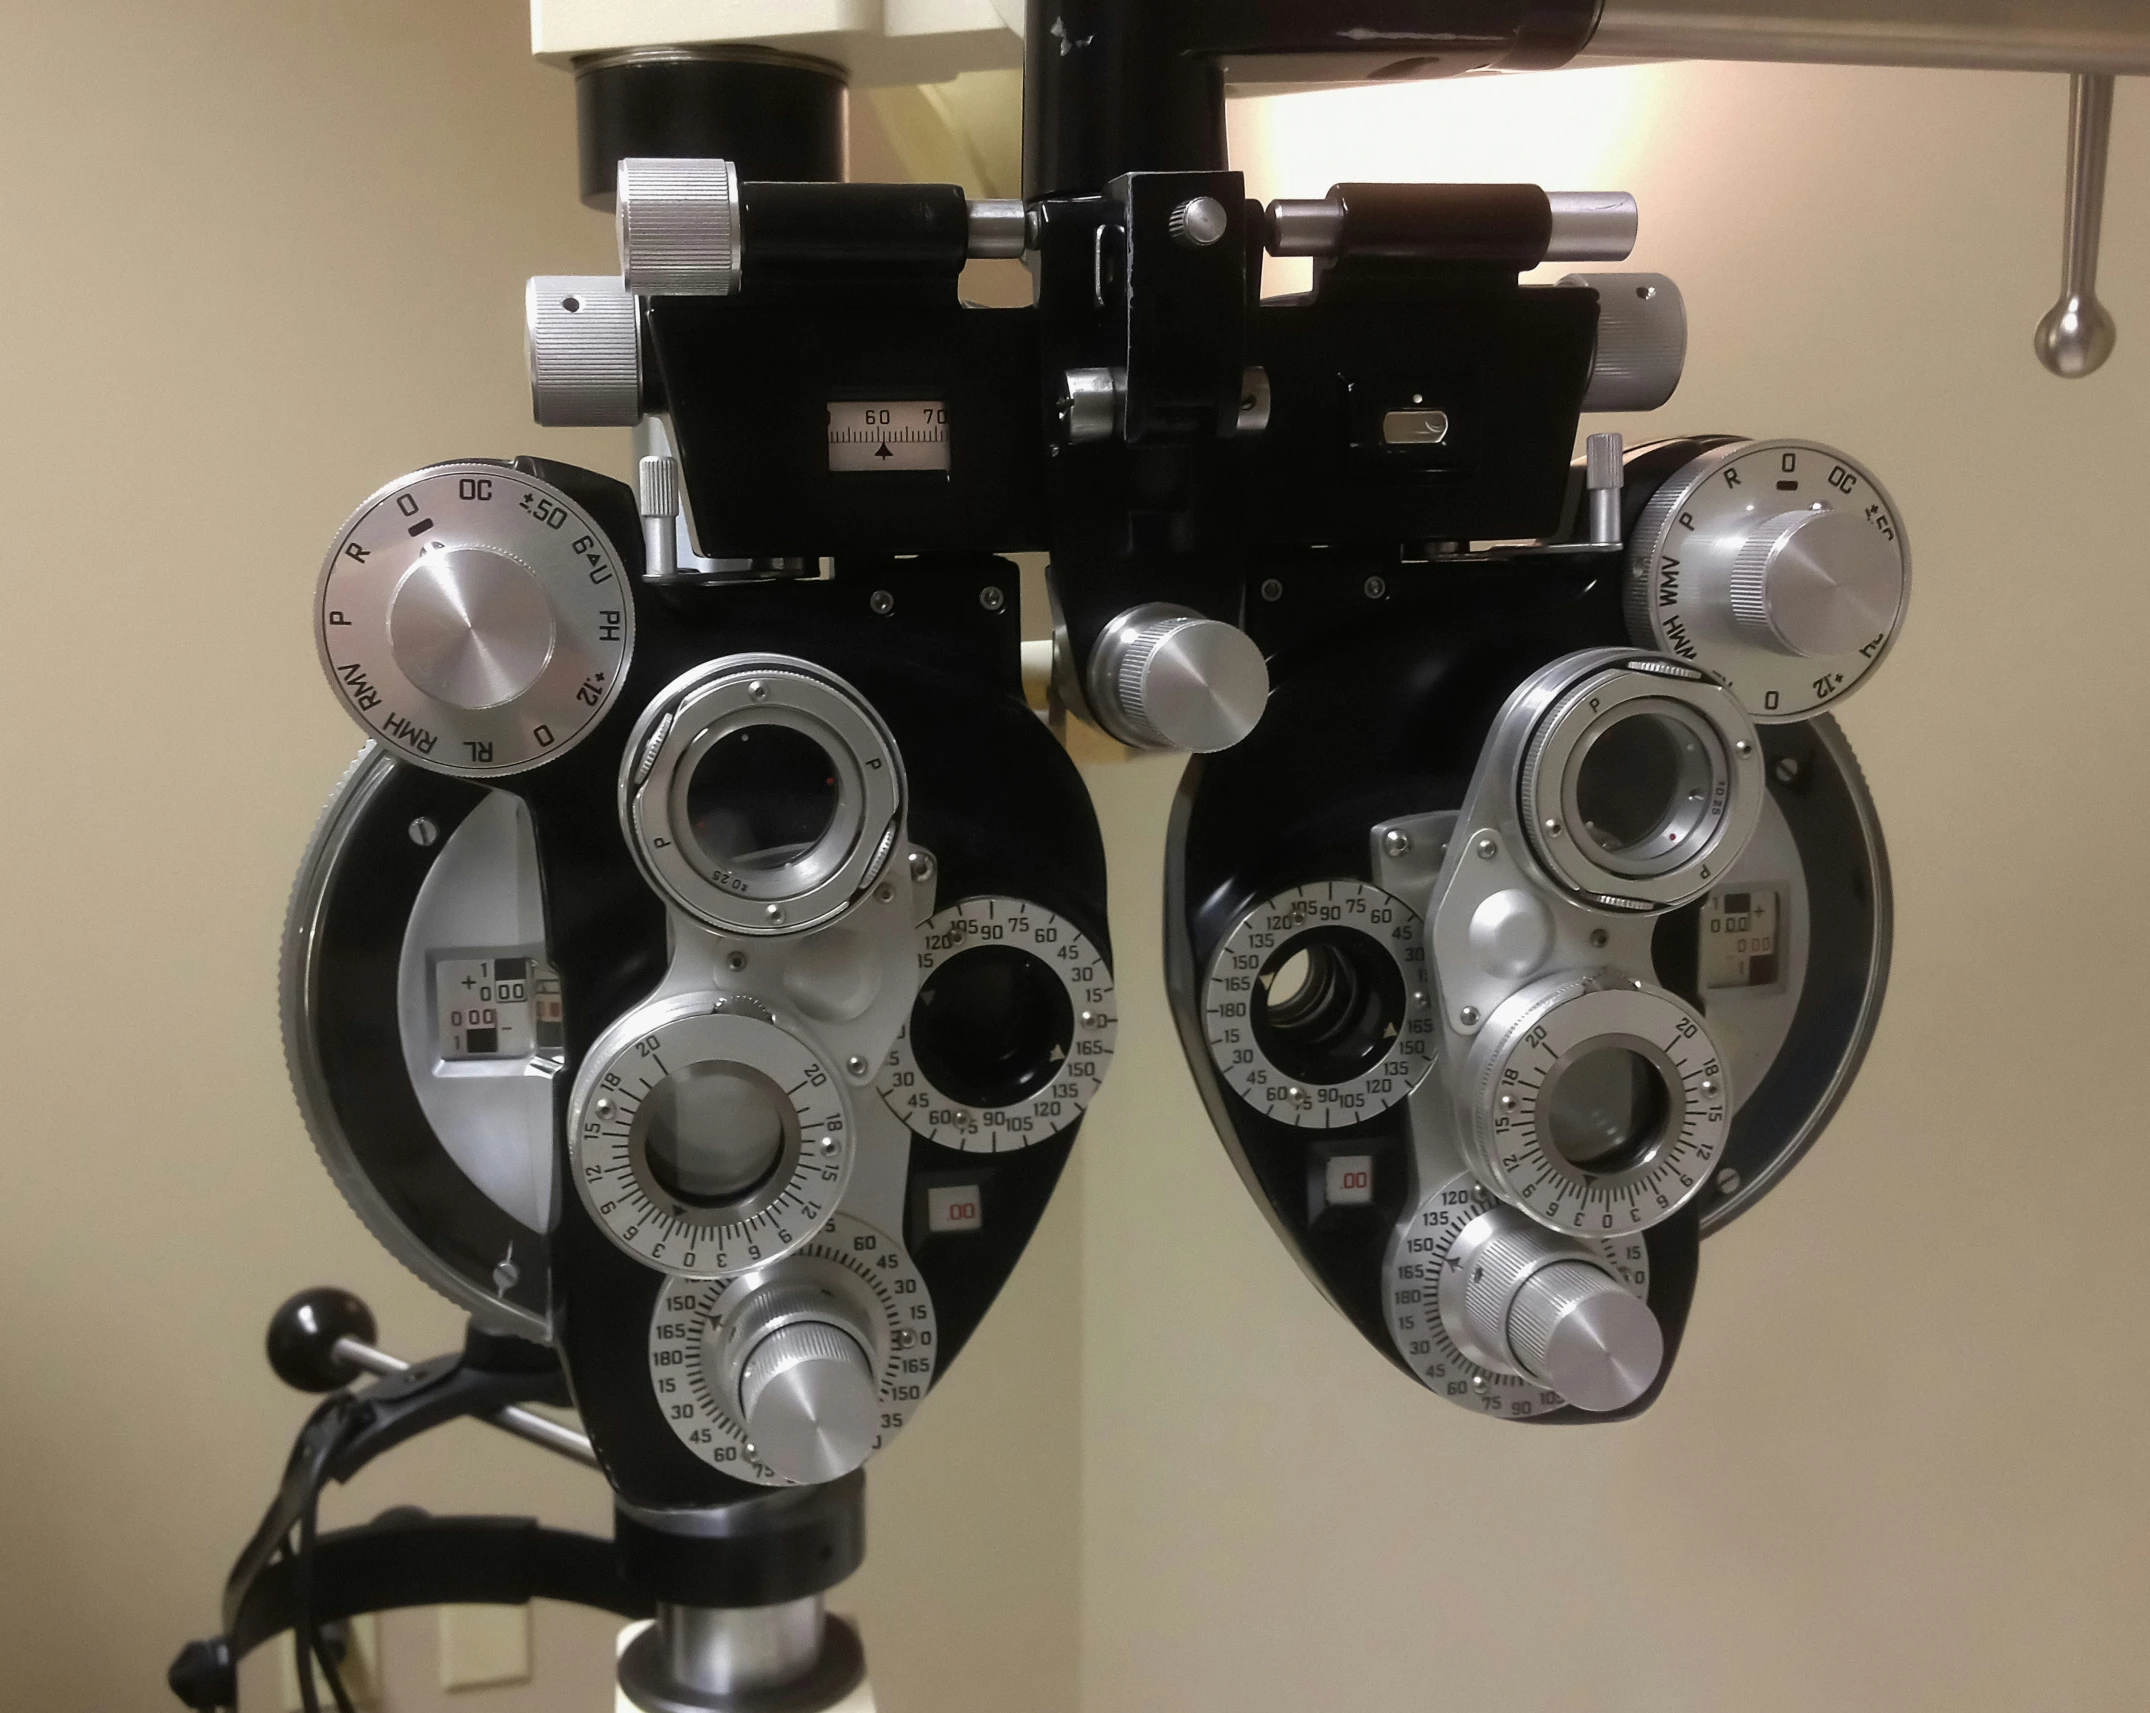 a very pretty looking eye chart with some lights